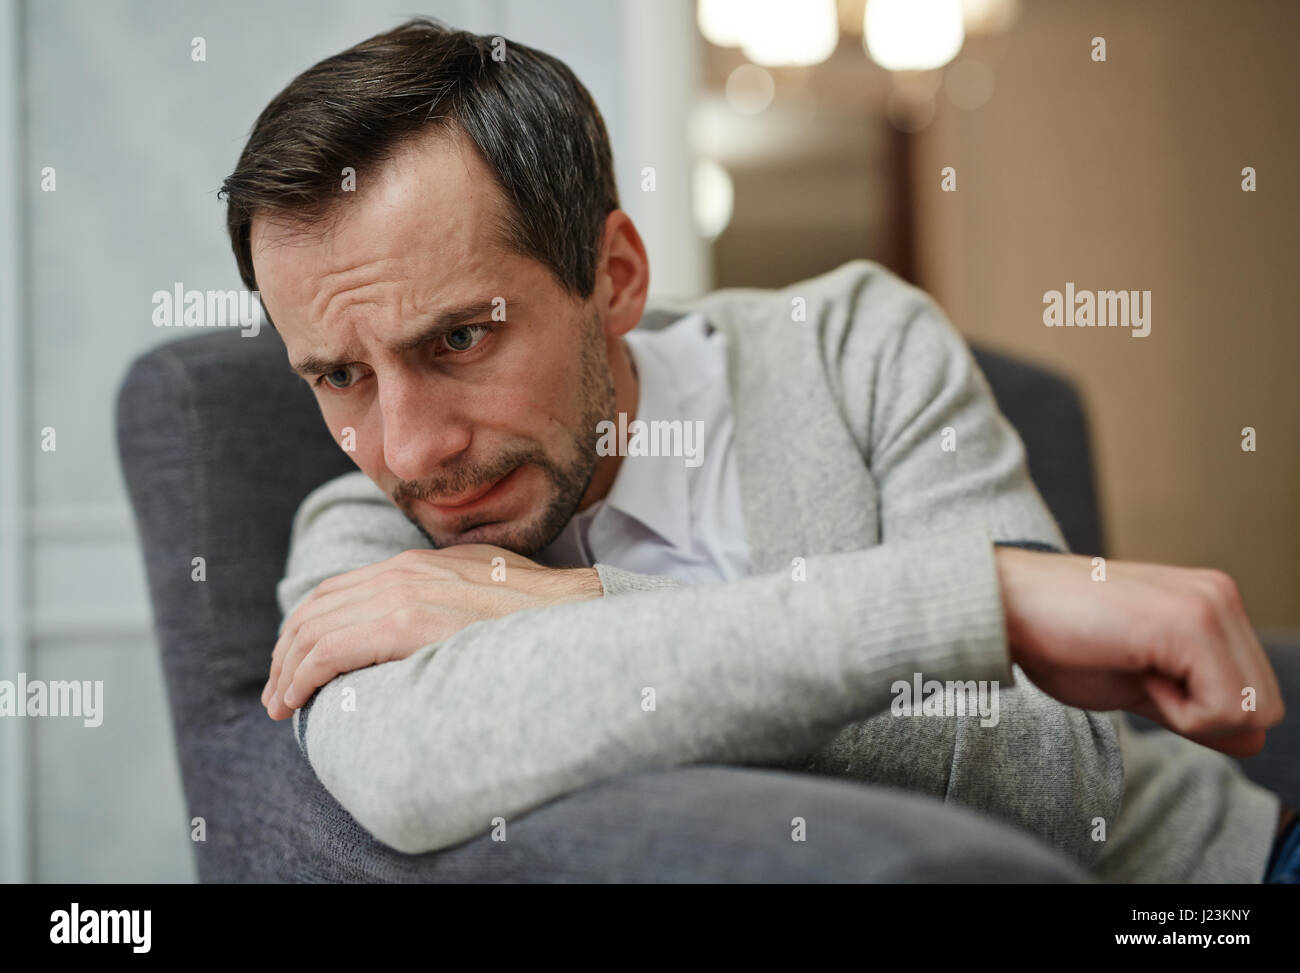 Stressed man sitting in armchair and crying Stock Photo